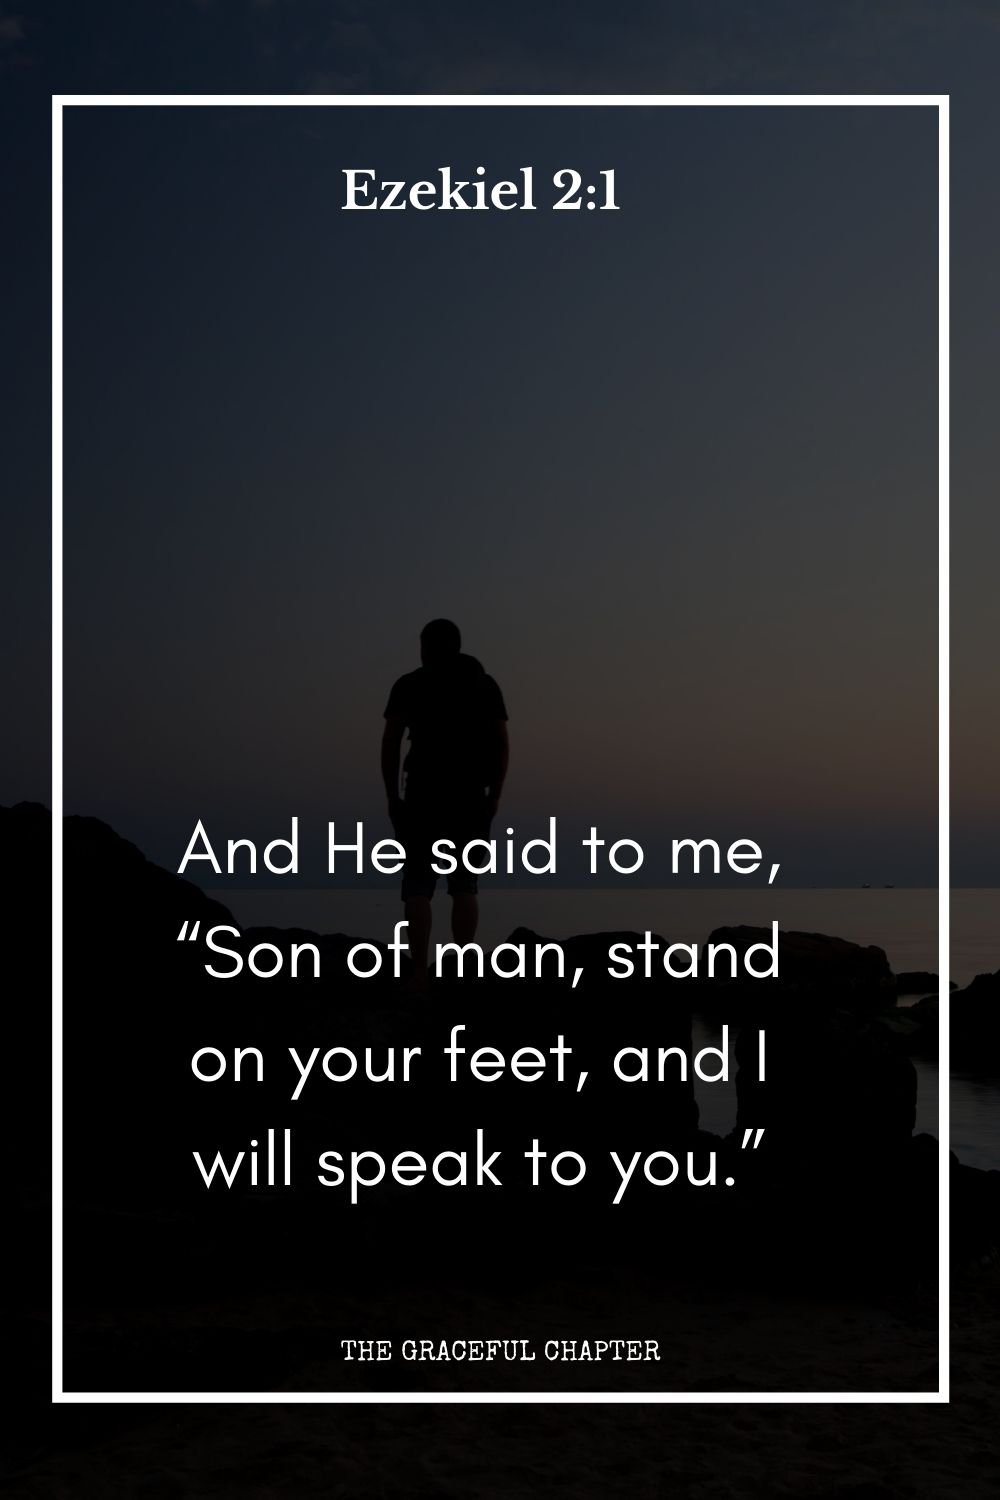 And He said to me, “Son of man, stand on your feet, and I will speak to you.”  Ezekiel 2:1